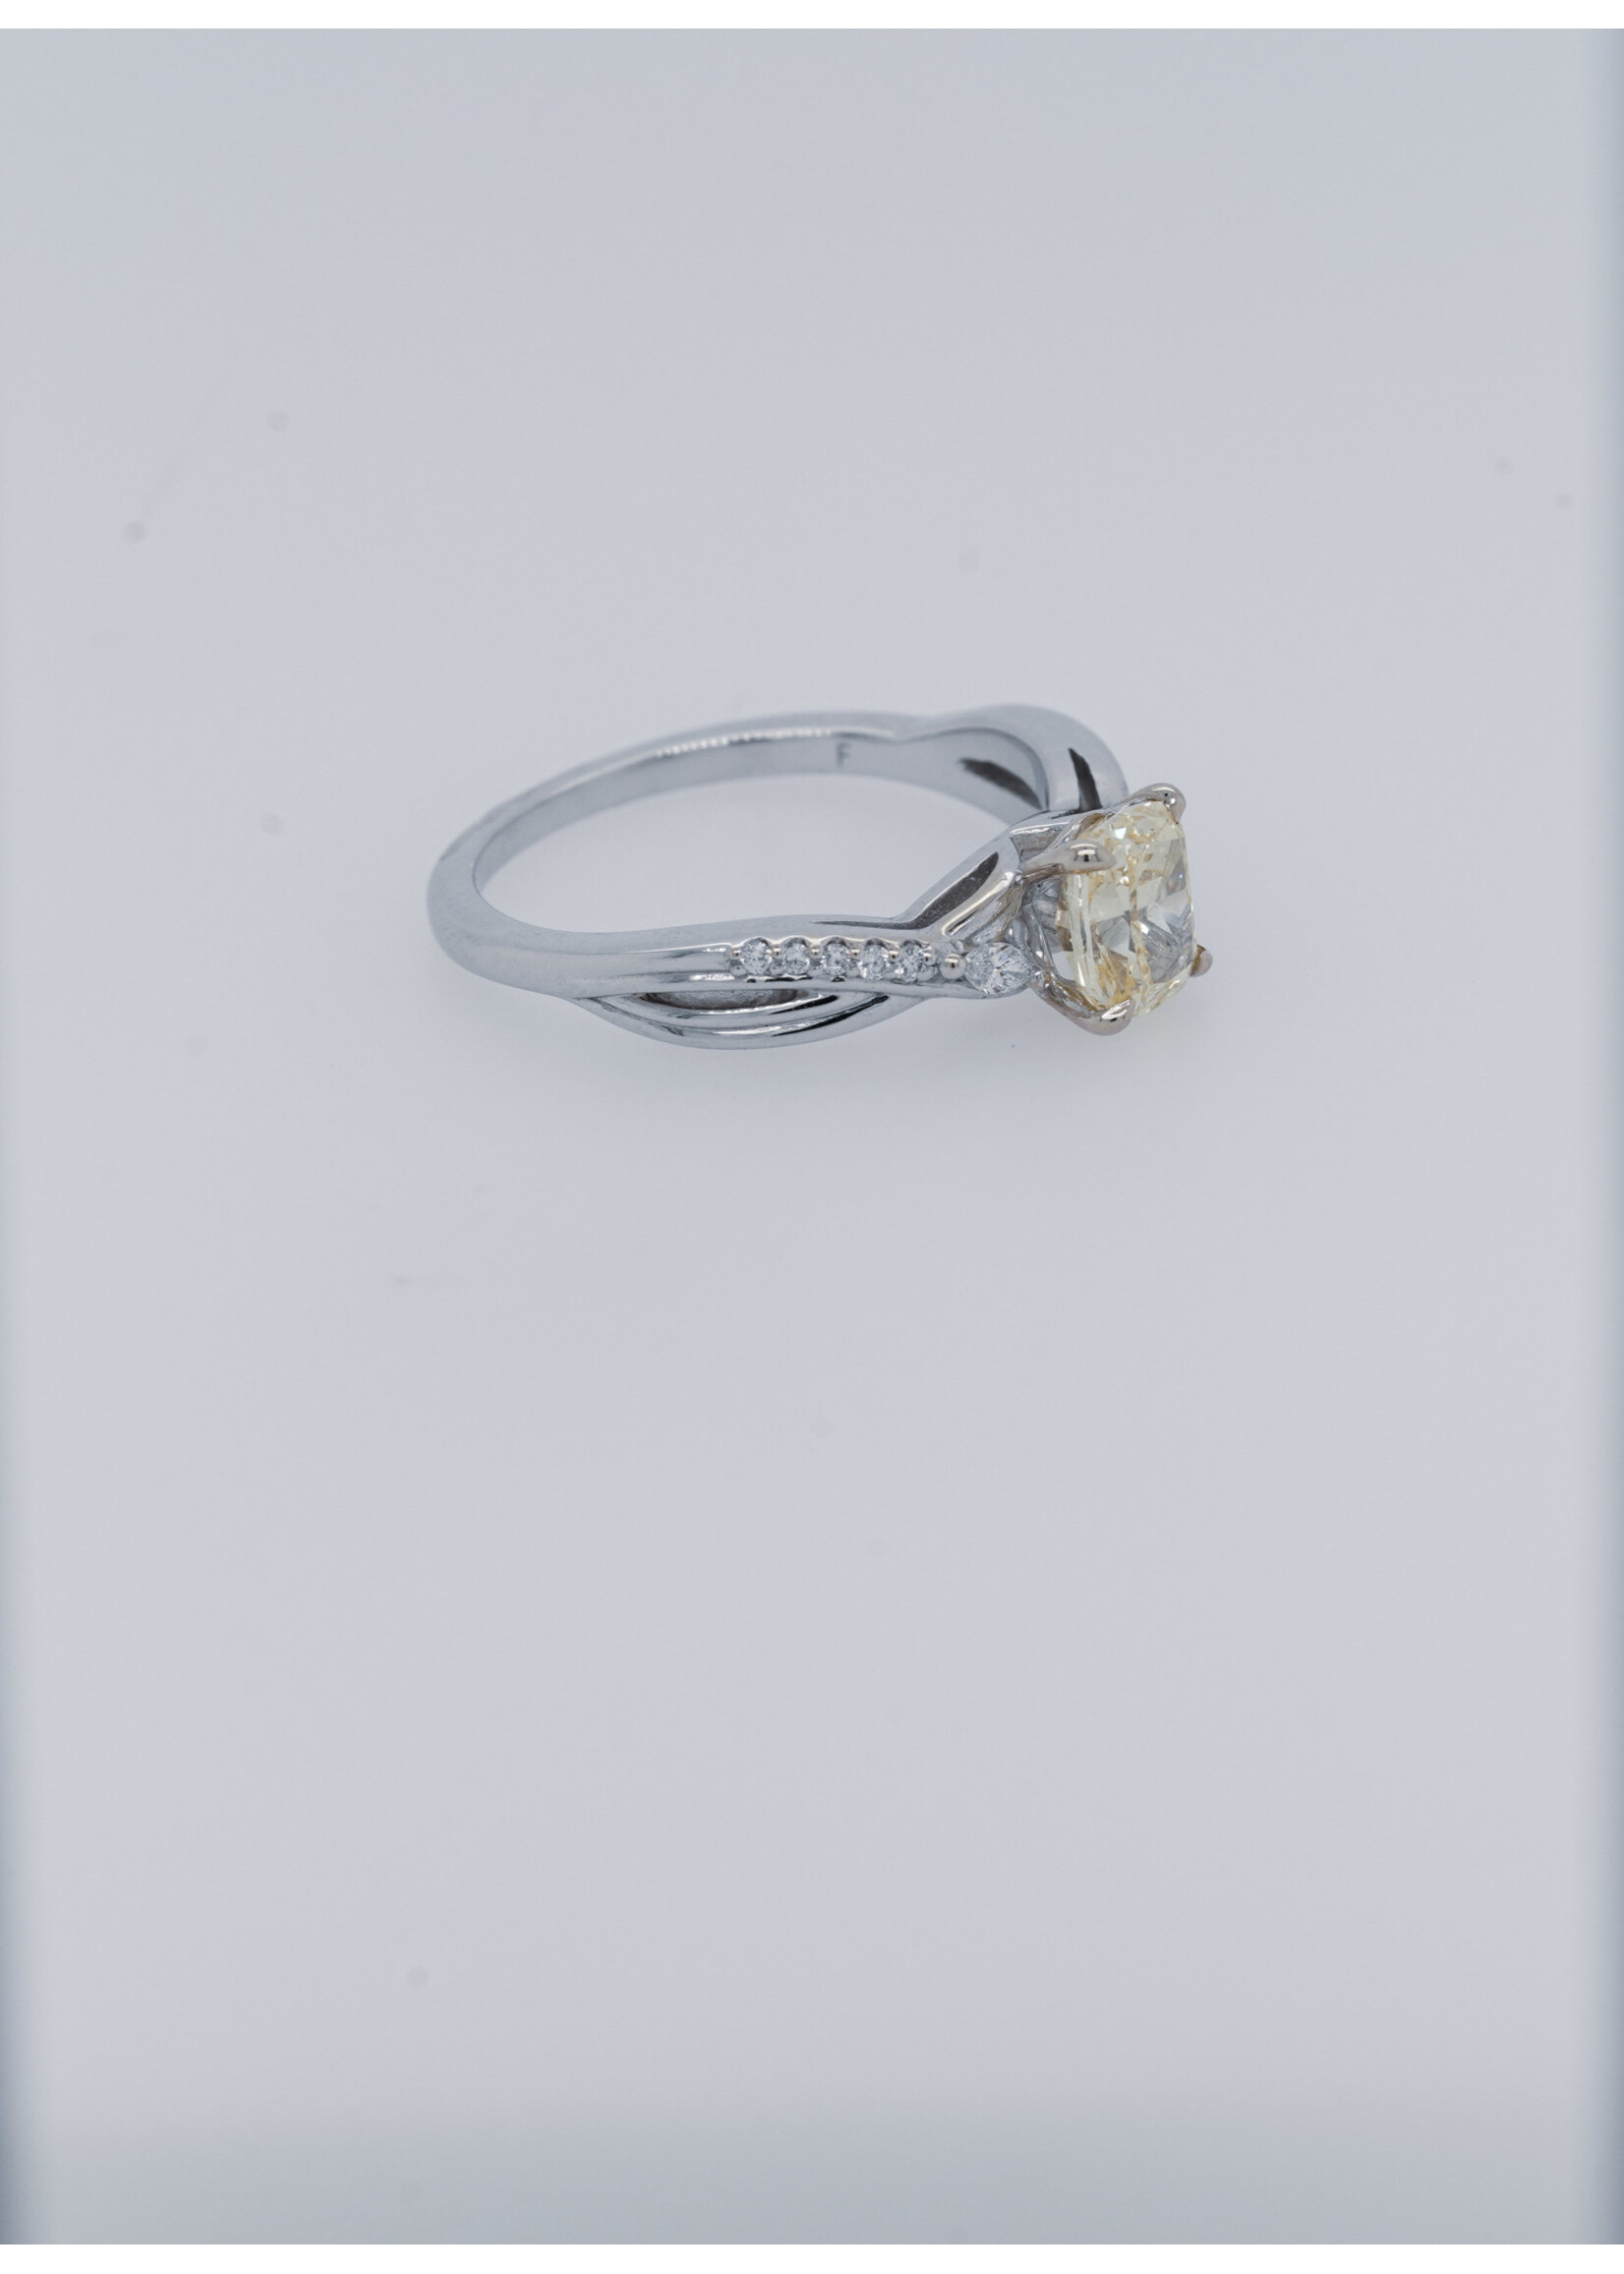 14KW 3.60g 1.19ctw (1.01ctr) FLY/SI1 Cushion Diamond Engagement Ring (size 7.25)